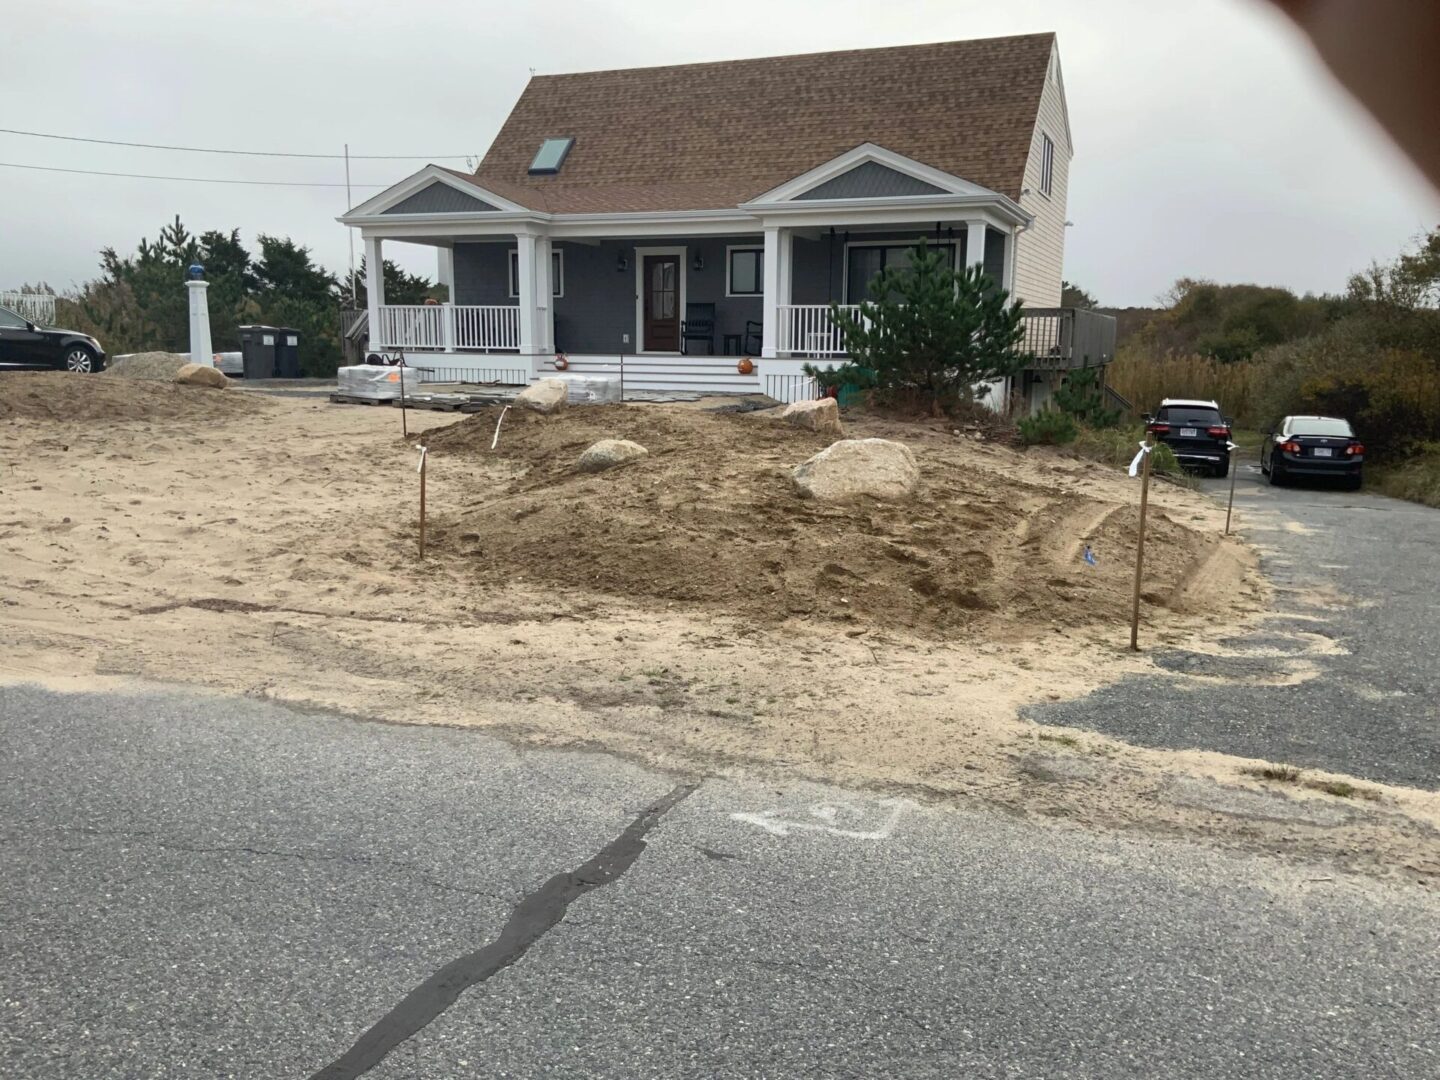 A house that is being remodeled in the sand.